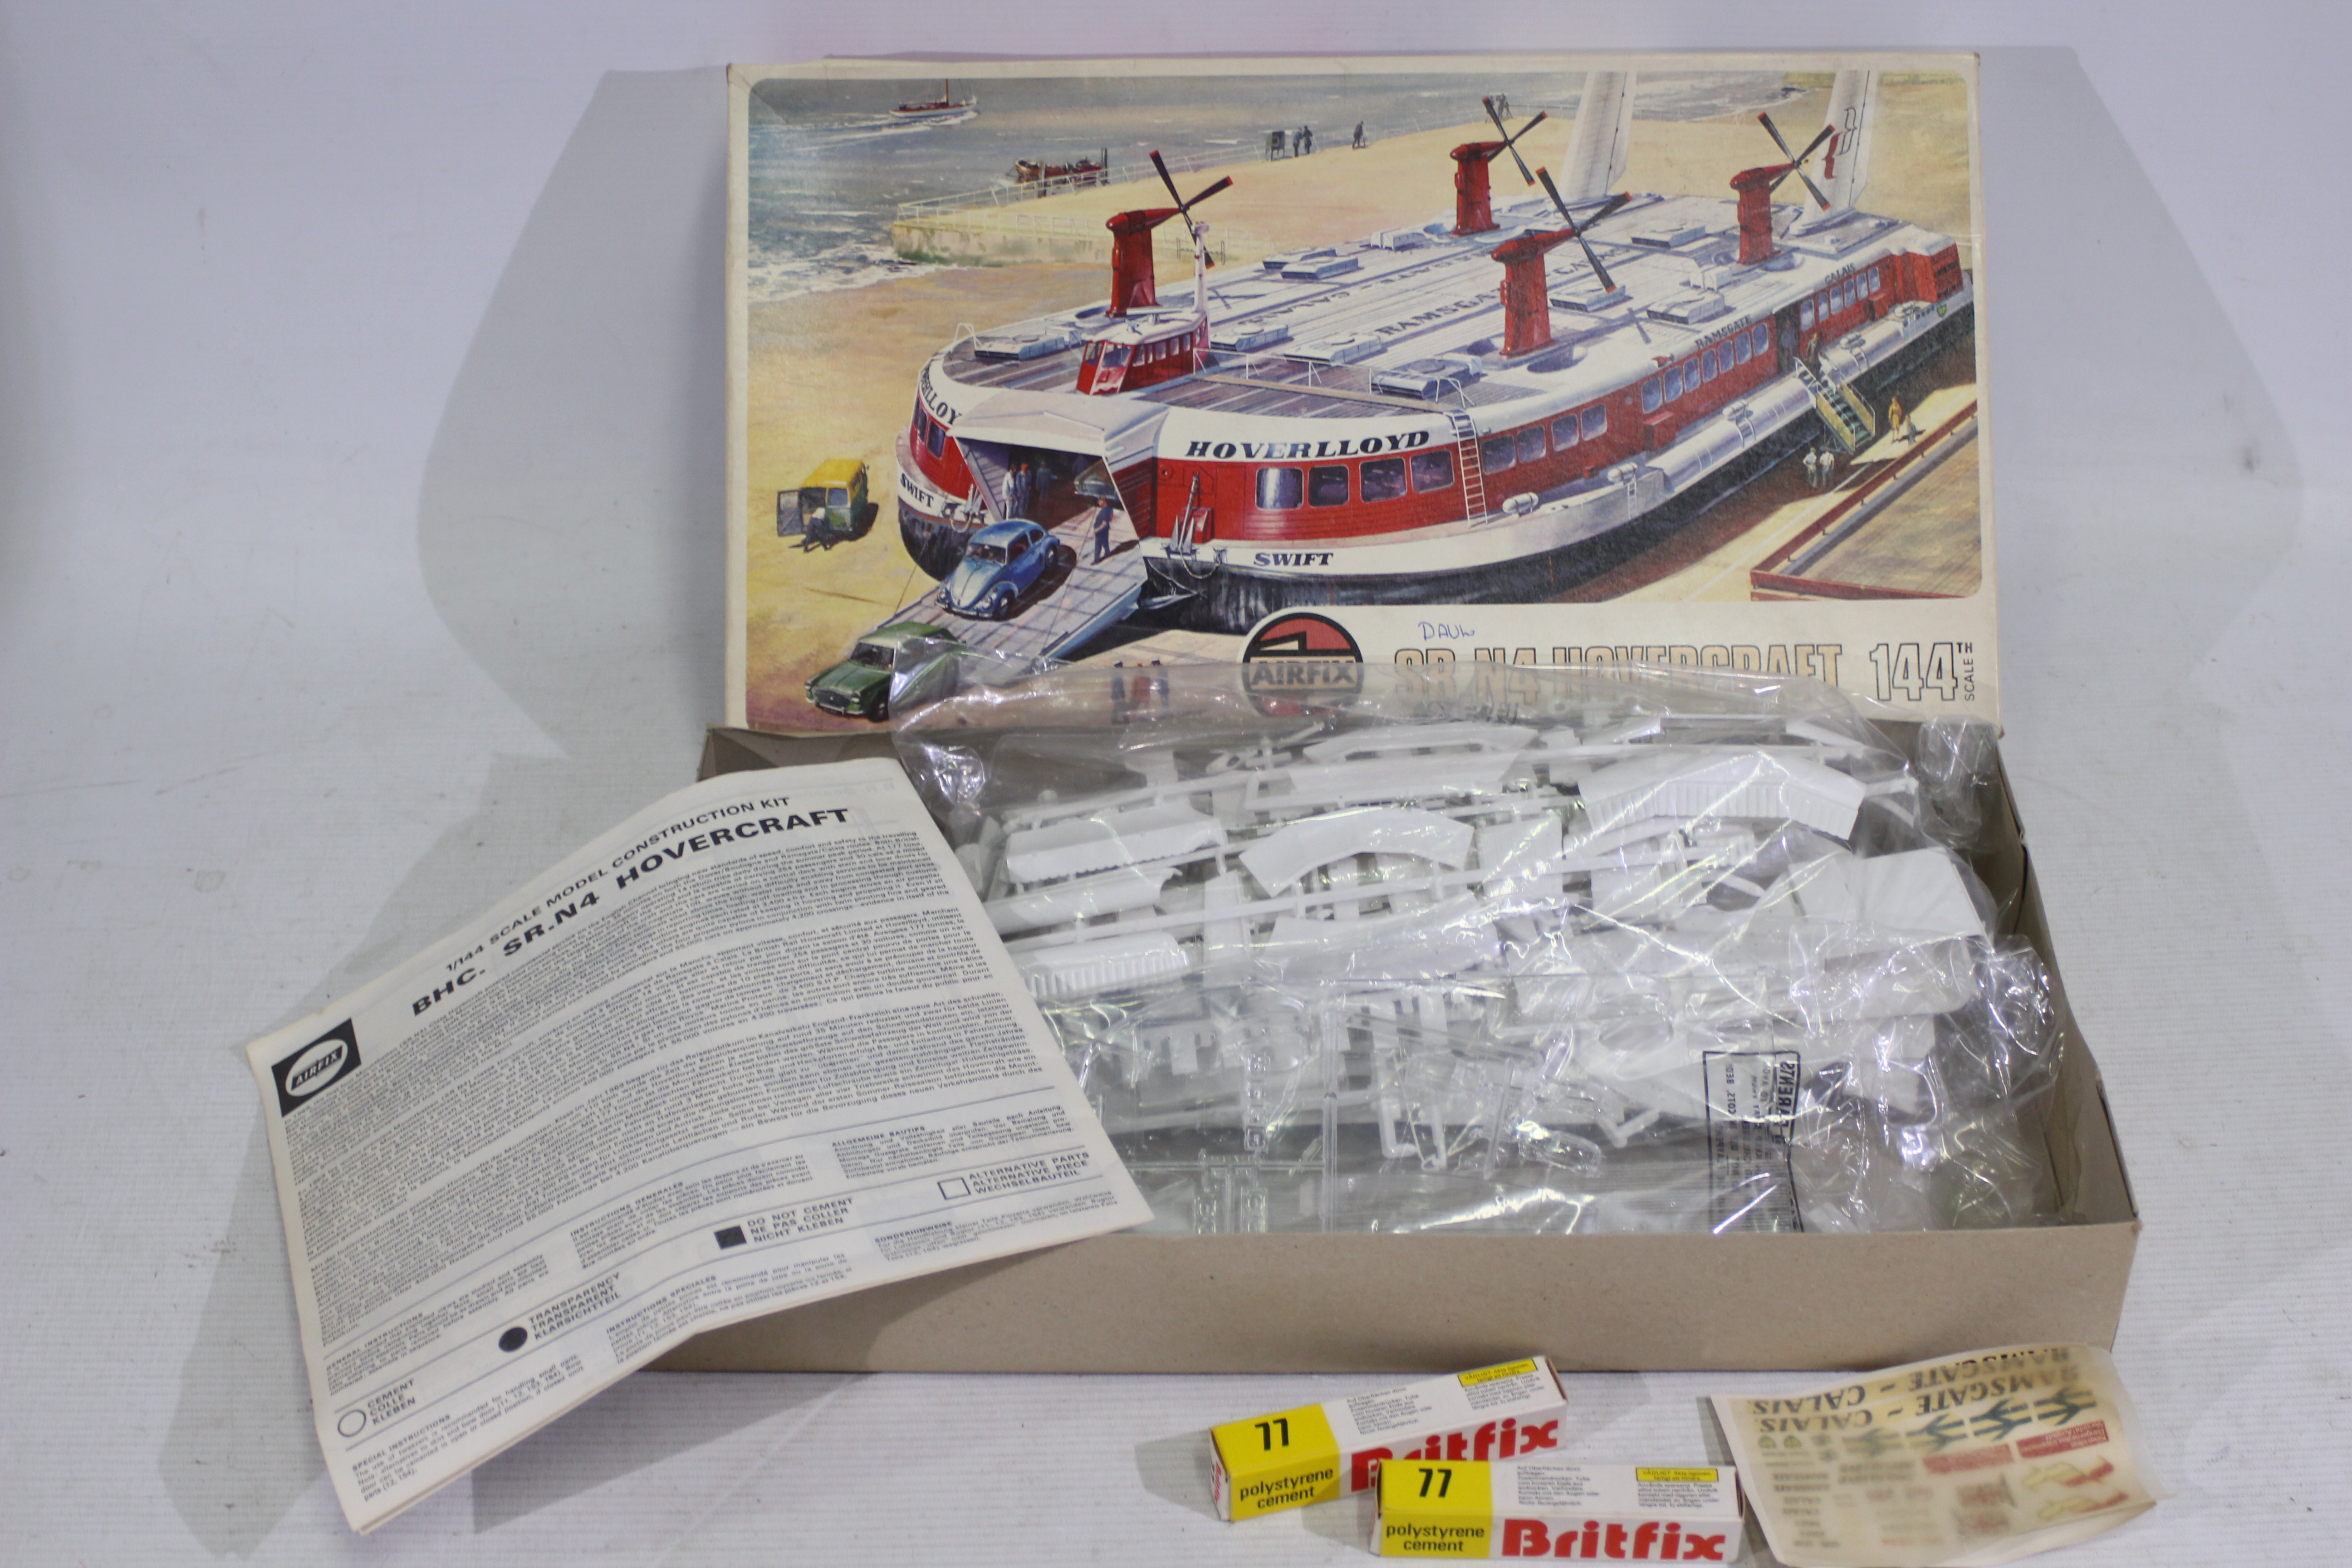 Airfix - 2 x boxed vintage kits, SR.N4 Hovercraft in 1:144 scale # 09171-8 and The Revenge # 801. - Image 3 of 3